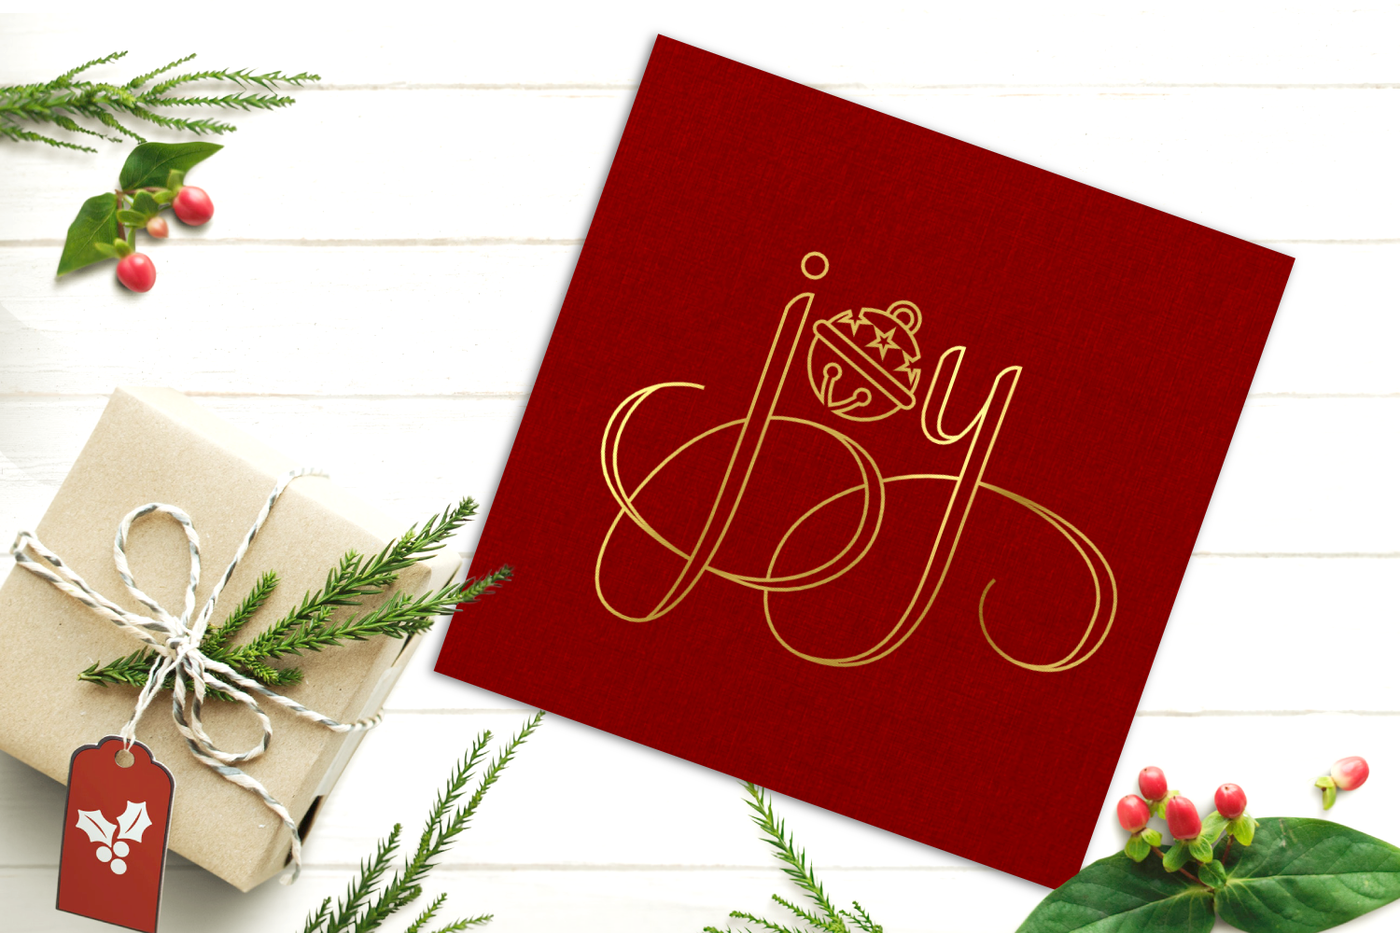 A square red card with the word "joy" in gold. The O is a round bell. Laying near the card are red and green foliage and a brown paper wrapped gift box.